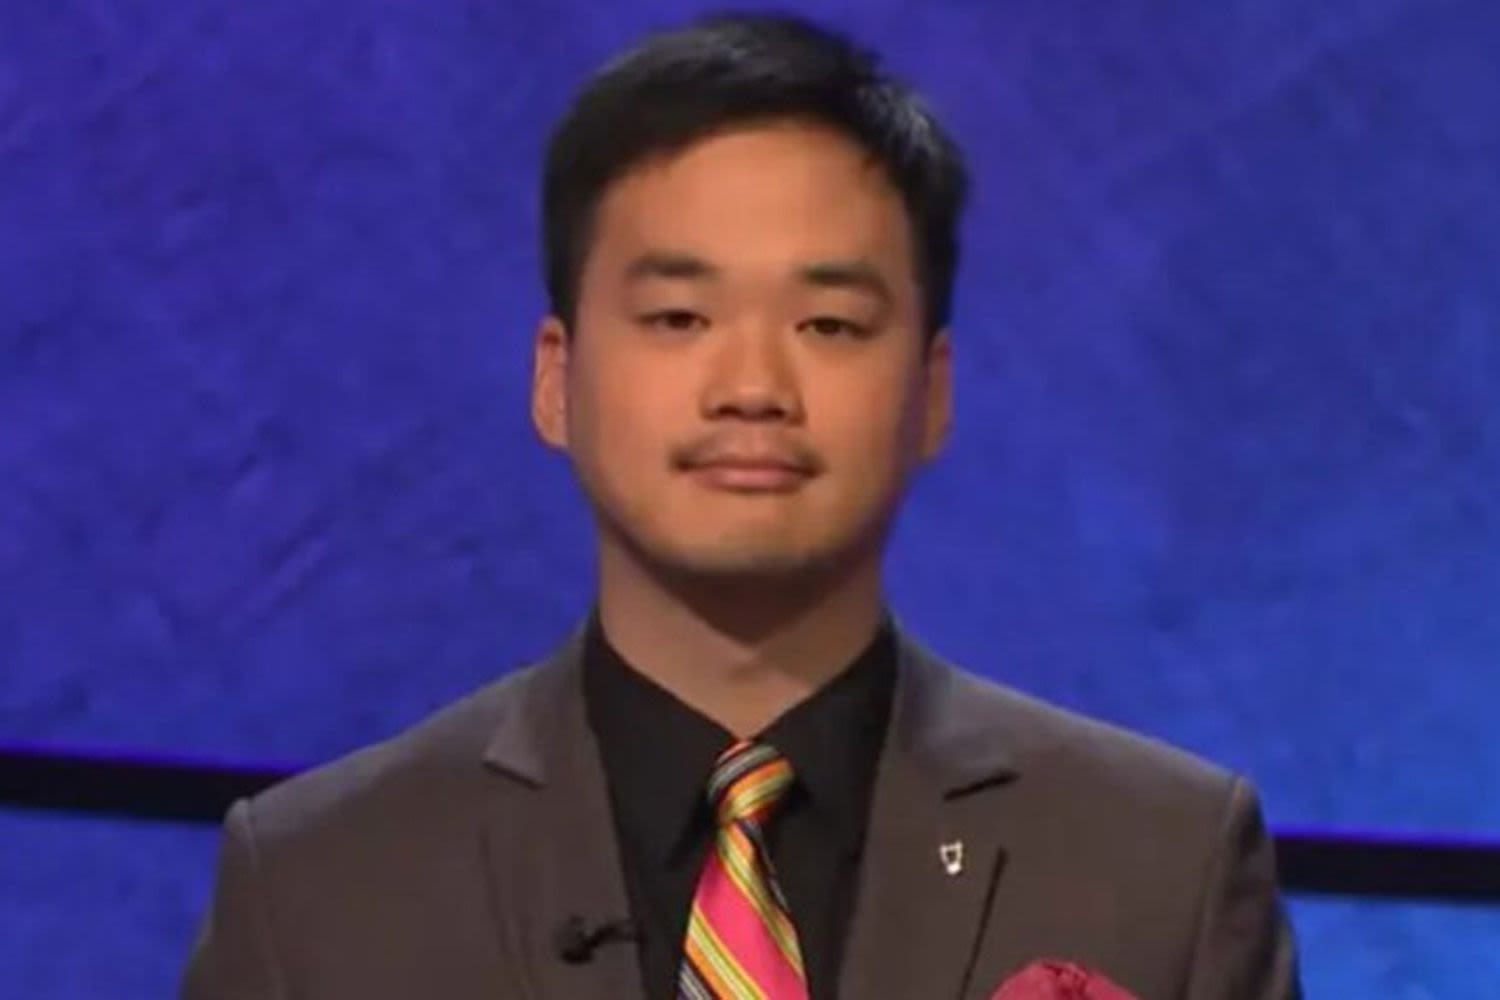 Former 'Jeopardy' contestant Winston Nguyen arrested on child pornography charges